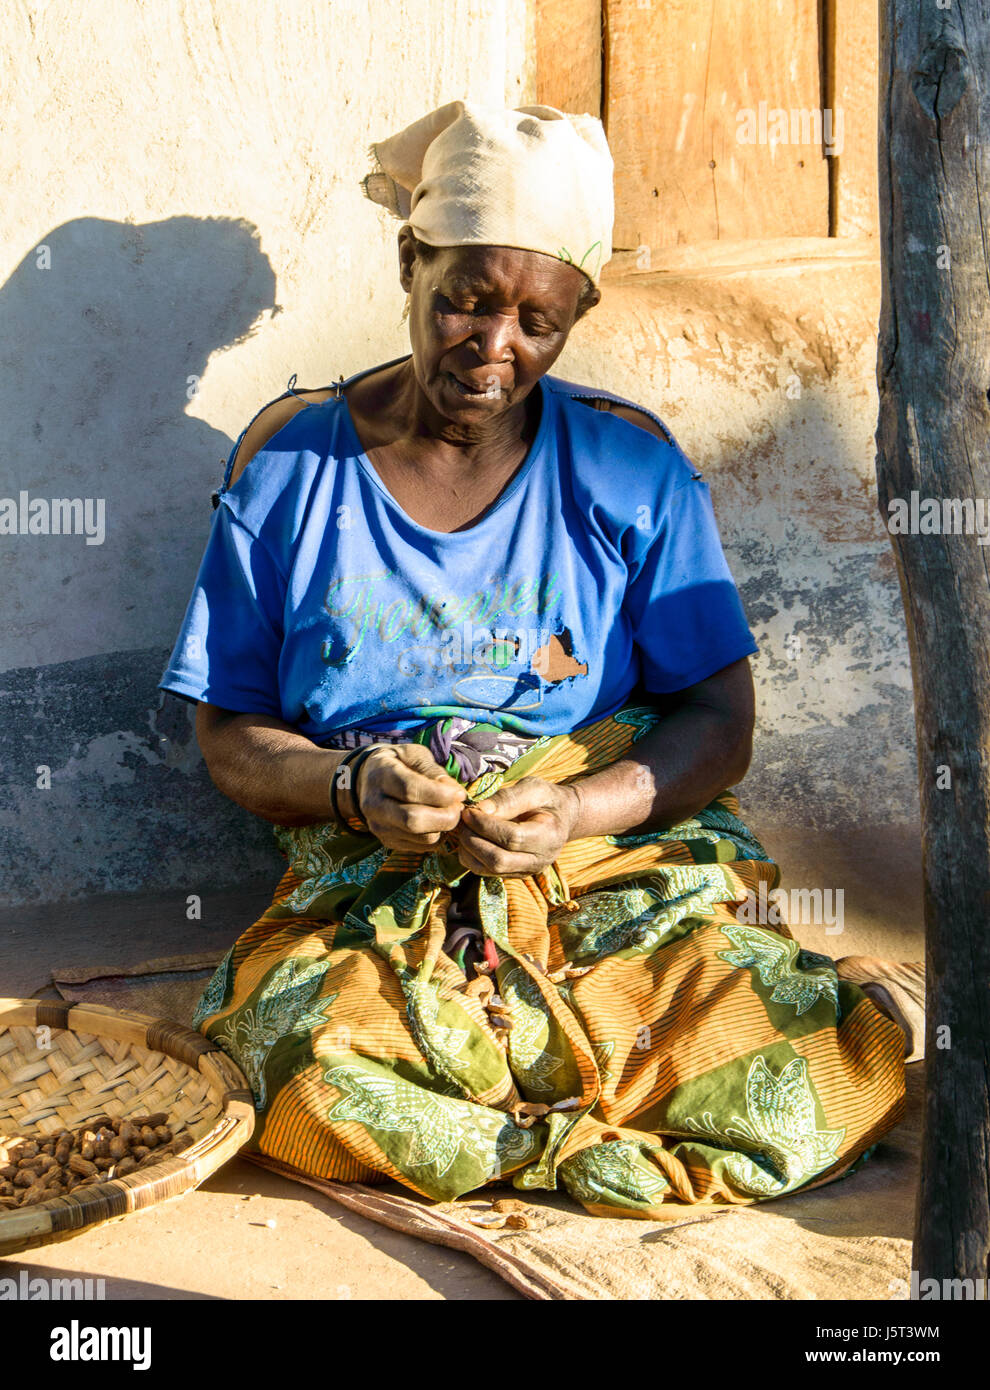 Elderly woman shelling ground nuts sitting on the khonde of her mud hut in a rural village in Malawi, Africa Stock Photo